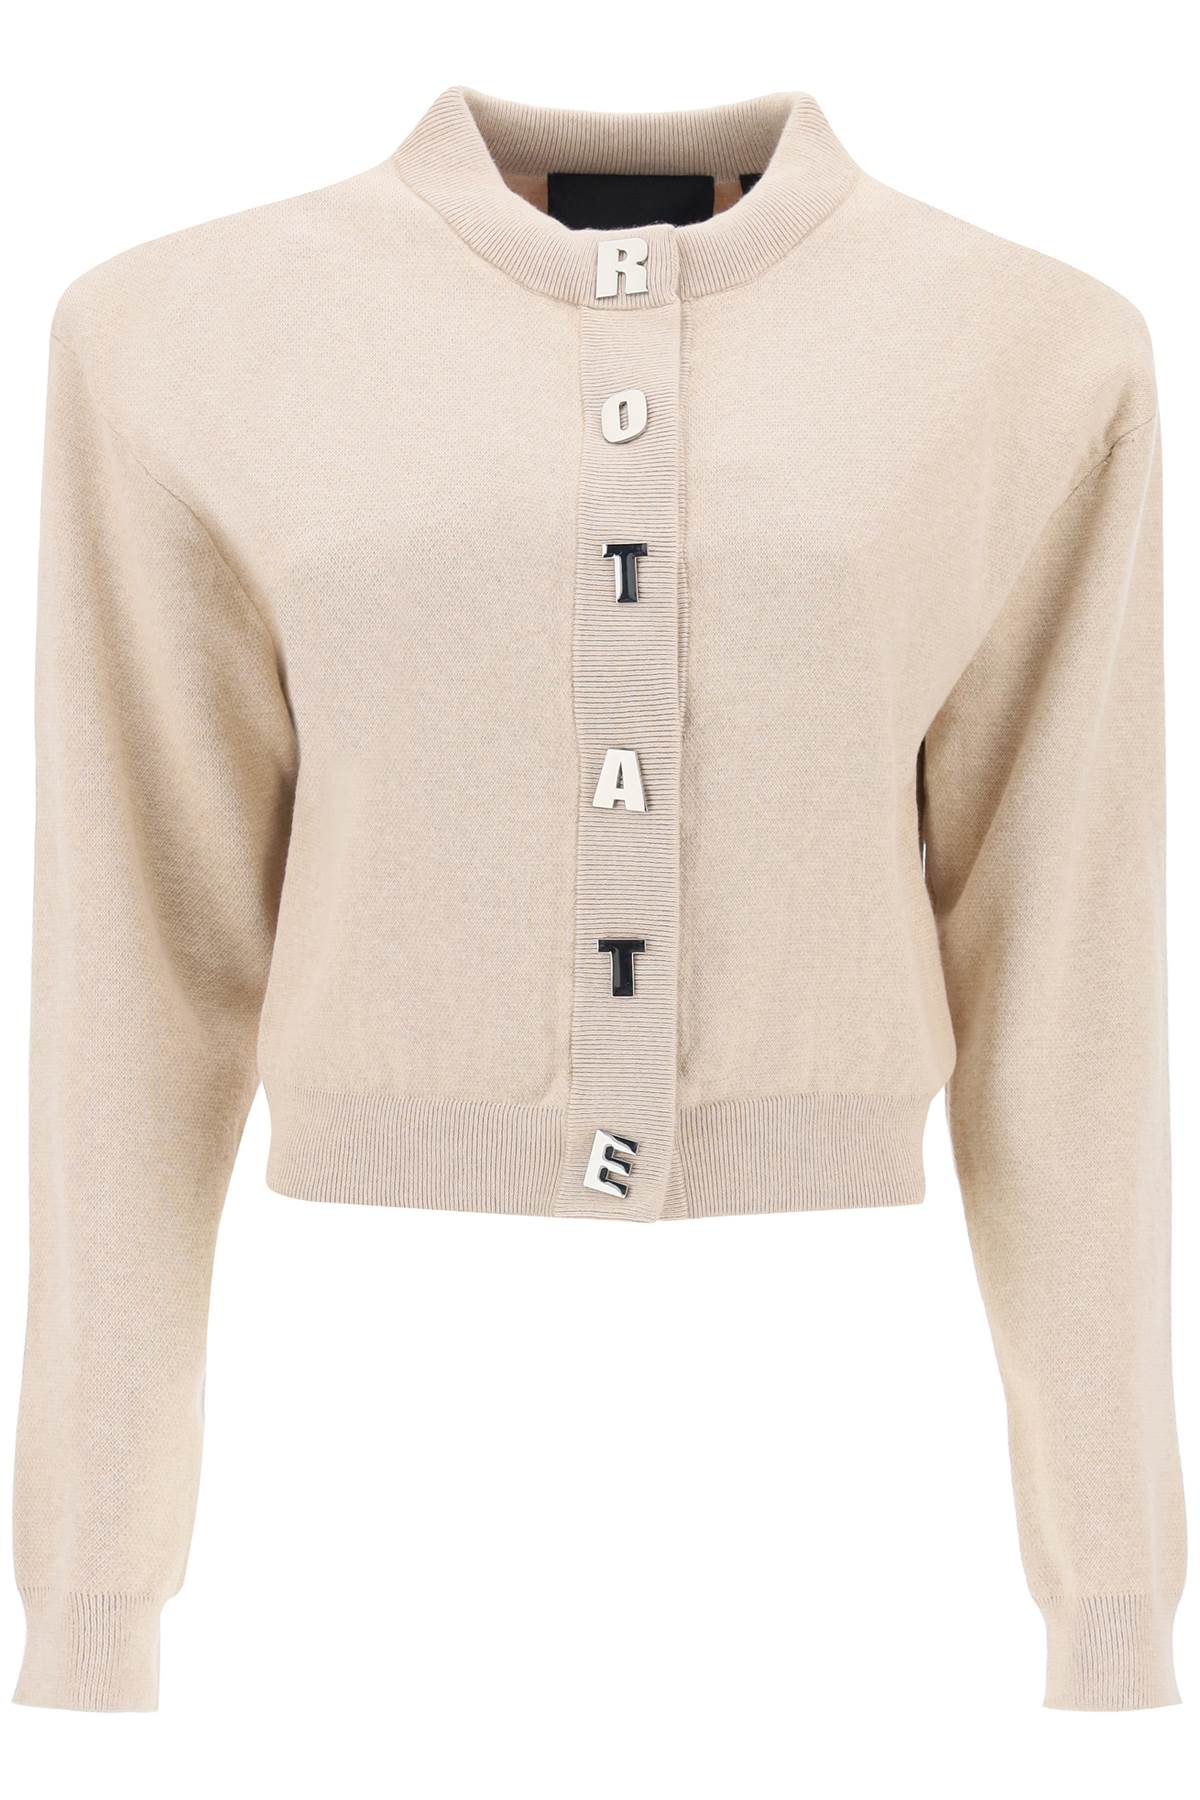 Rotate ROTATE structured knit cardigan in italian